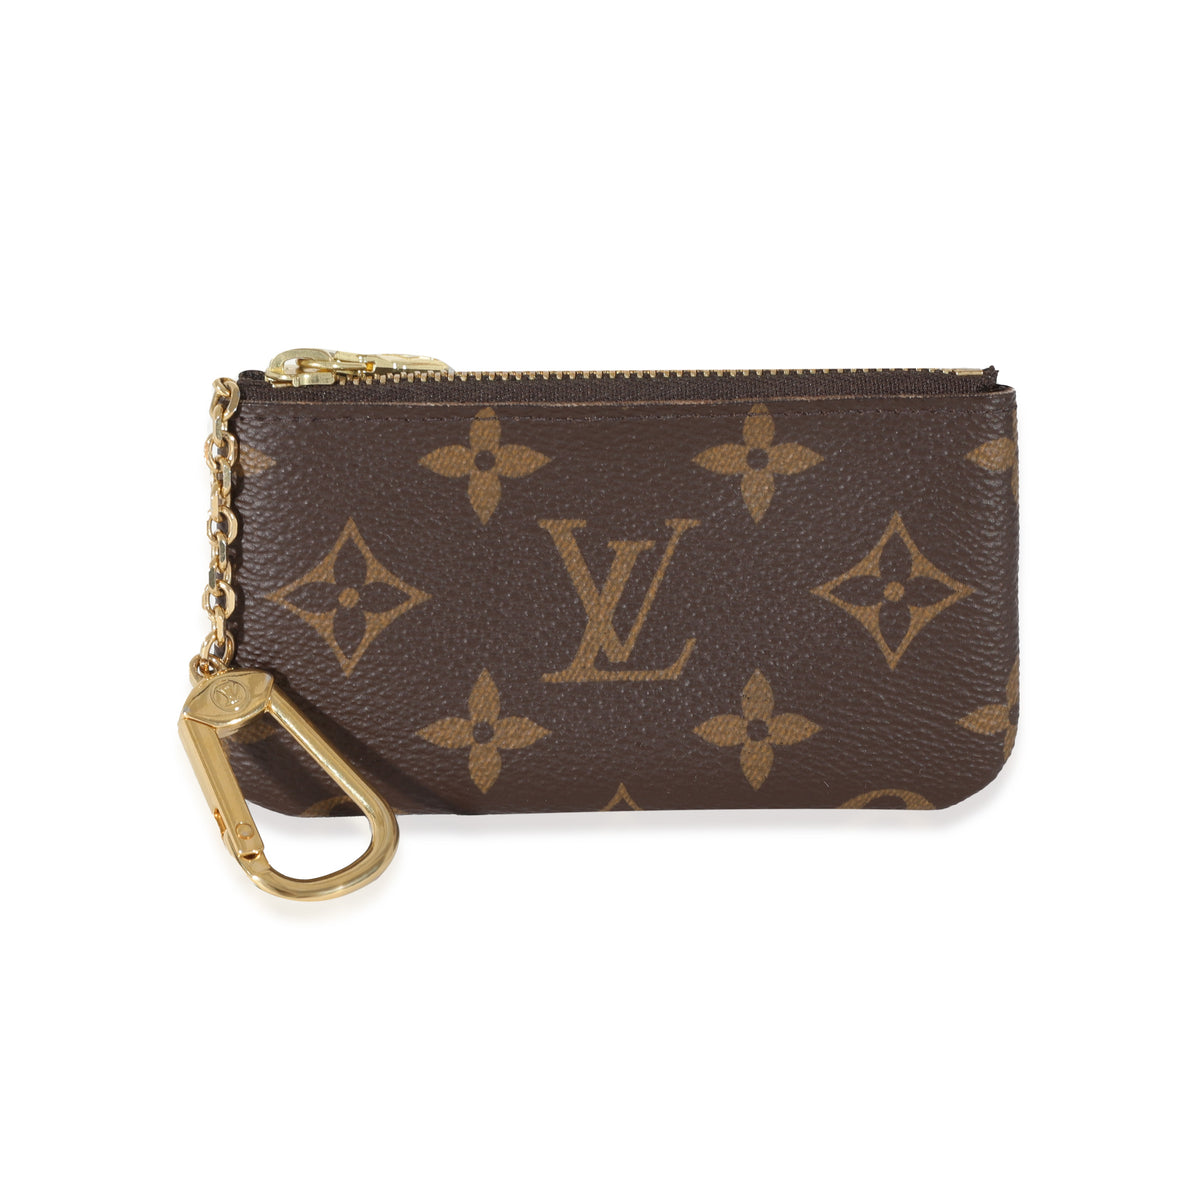 Louis Vuitton Key Pouch in Monogram Canvas - Bags from David